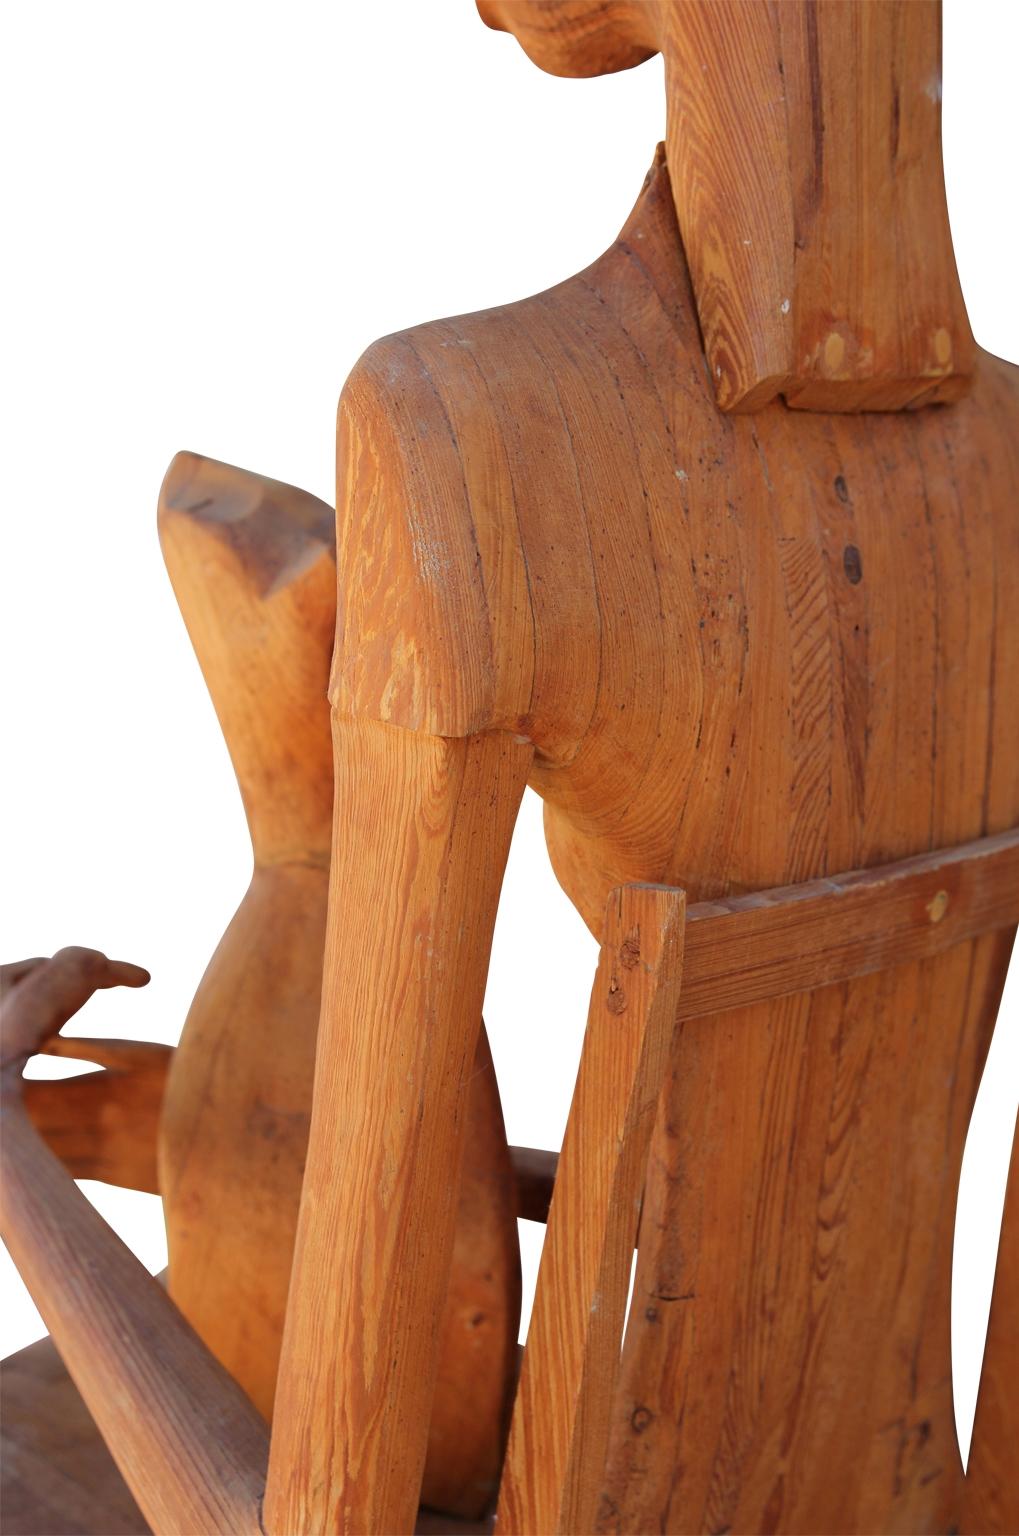 Modern Hand Carved Wooden Folk Sculpture of a Seated Woman with a Pet Cat  5